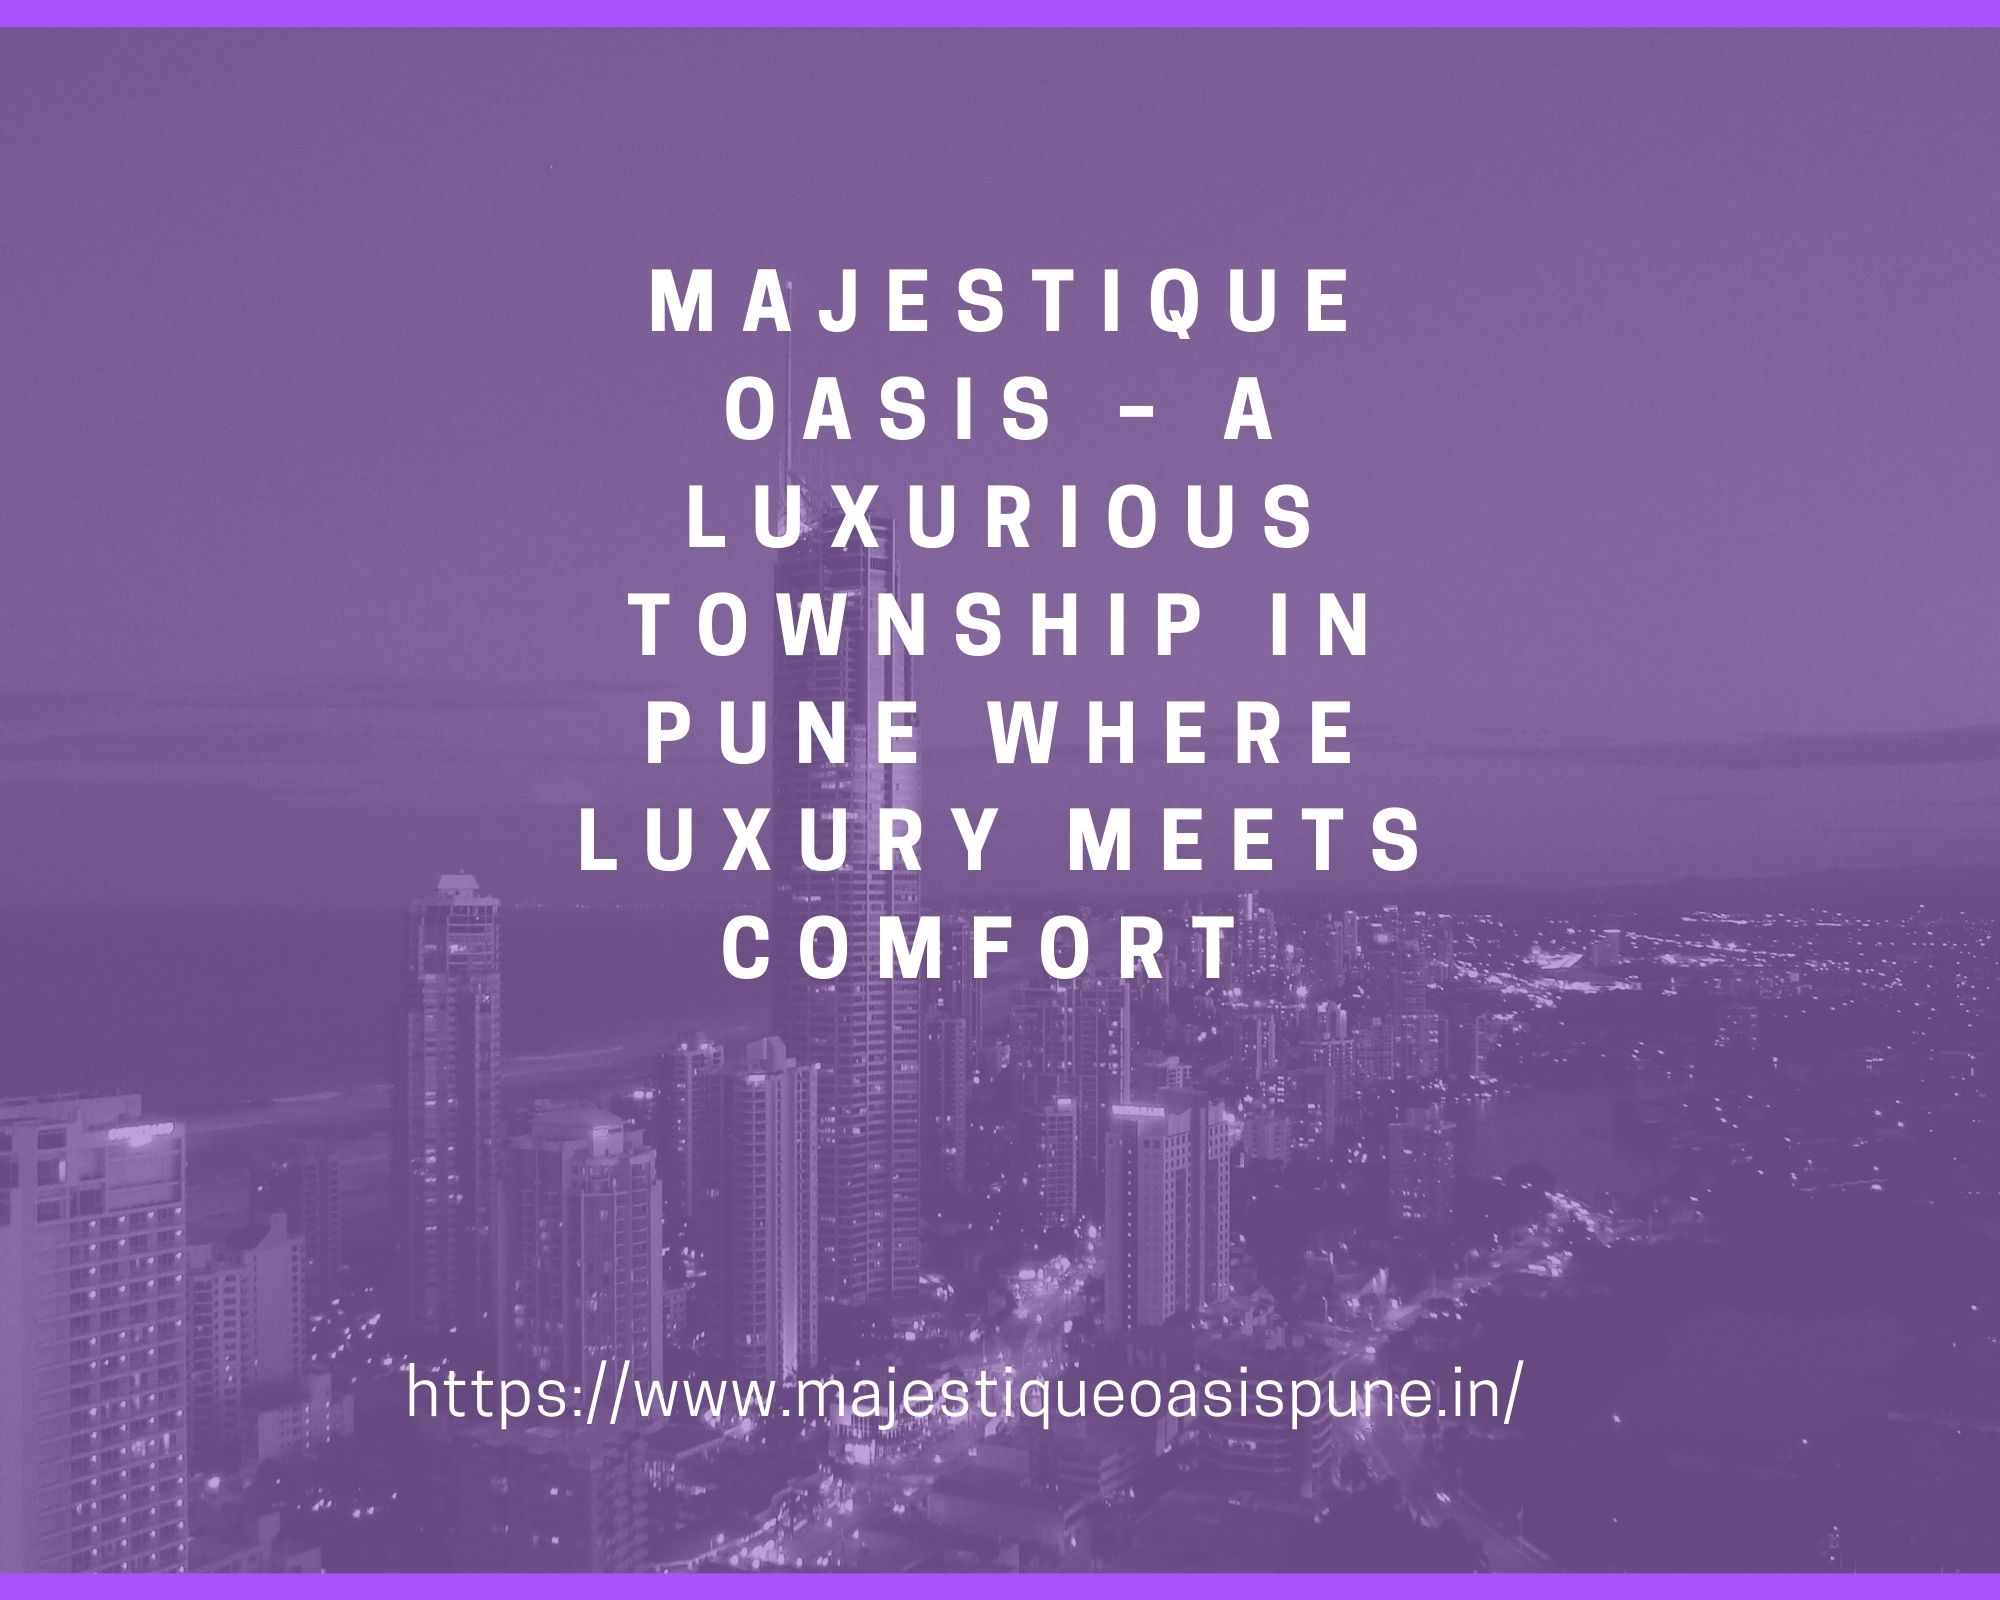 Majestique Oasis - a luxurious township in Pune where luxury meets comfort